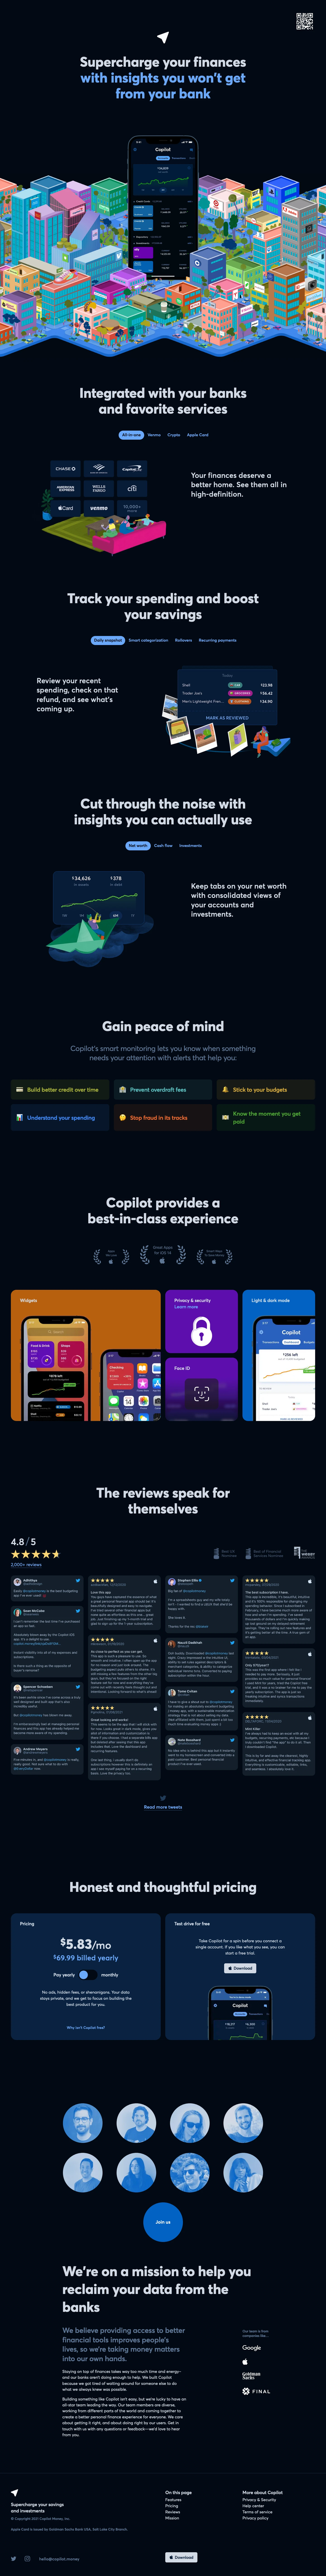 Copilot Landing Page Example: Copilot supercharges your finances with insights you can't get from your bank. Track your spending, boost your savings, and see your financial data in high-definition.